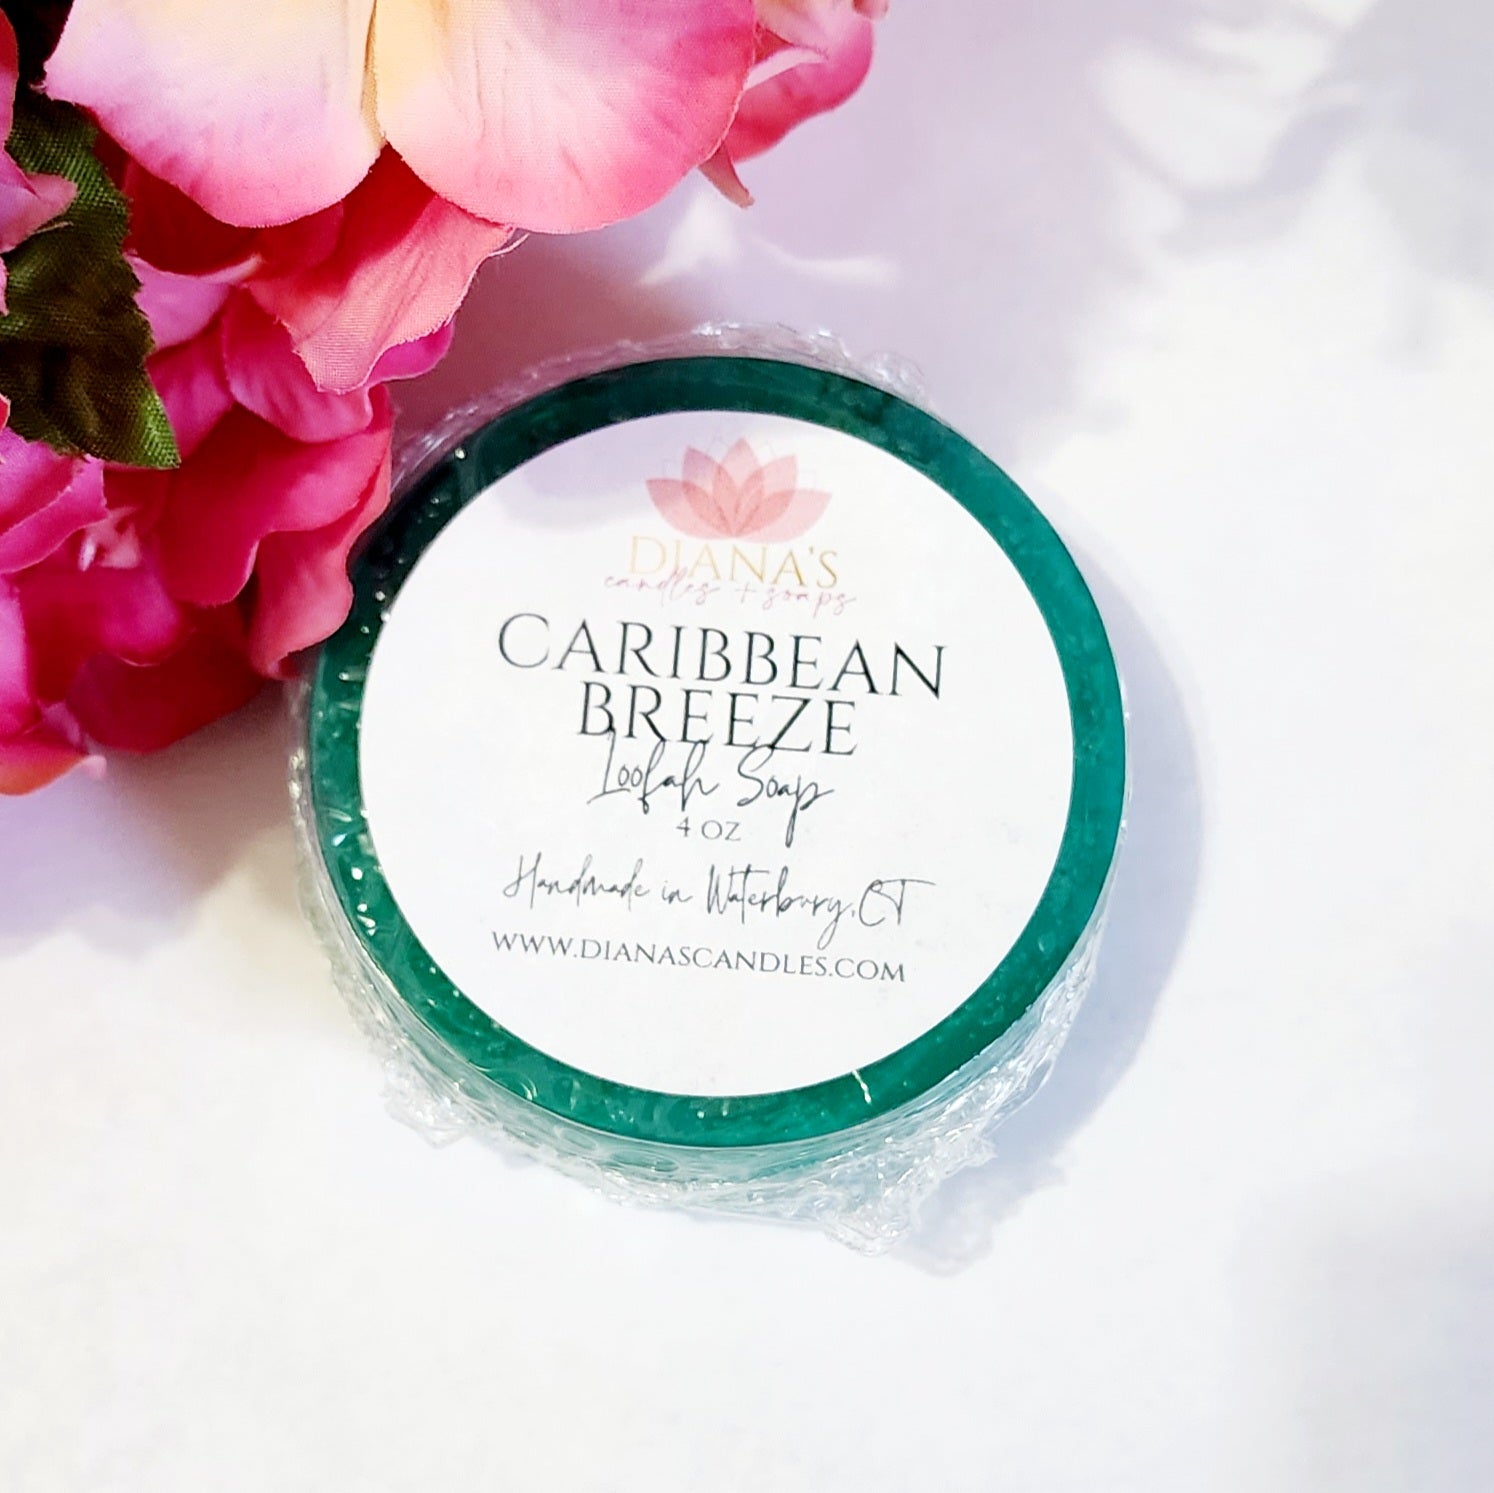 Caribbean Breeze Loofah Soap Diana's Candles and Soaps 